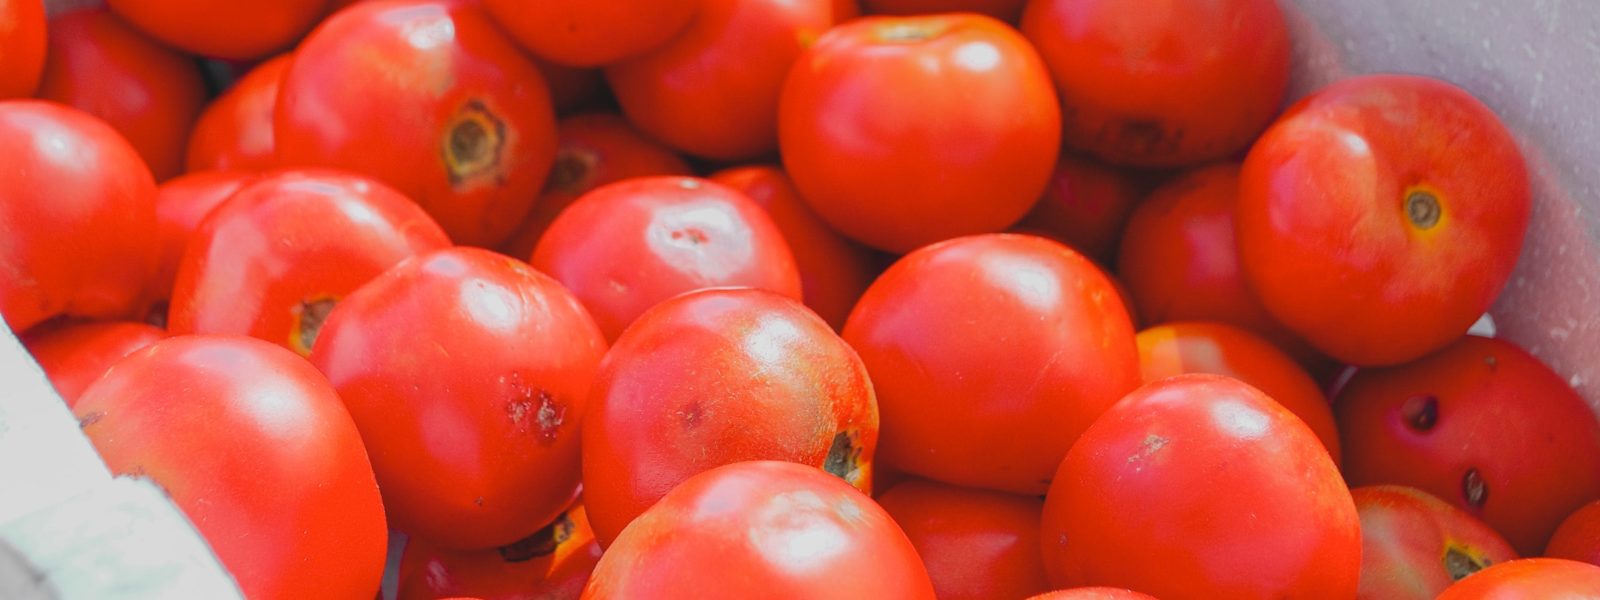 A box of red tomatoes